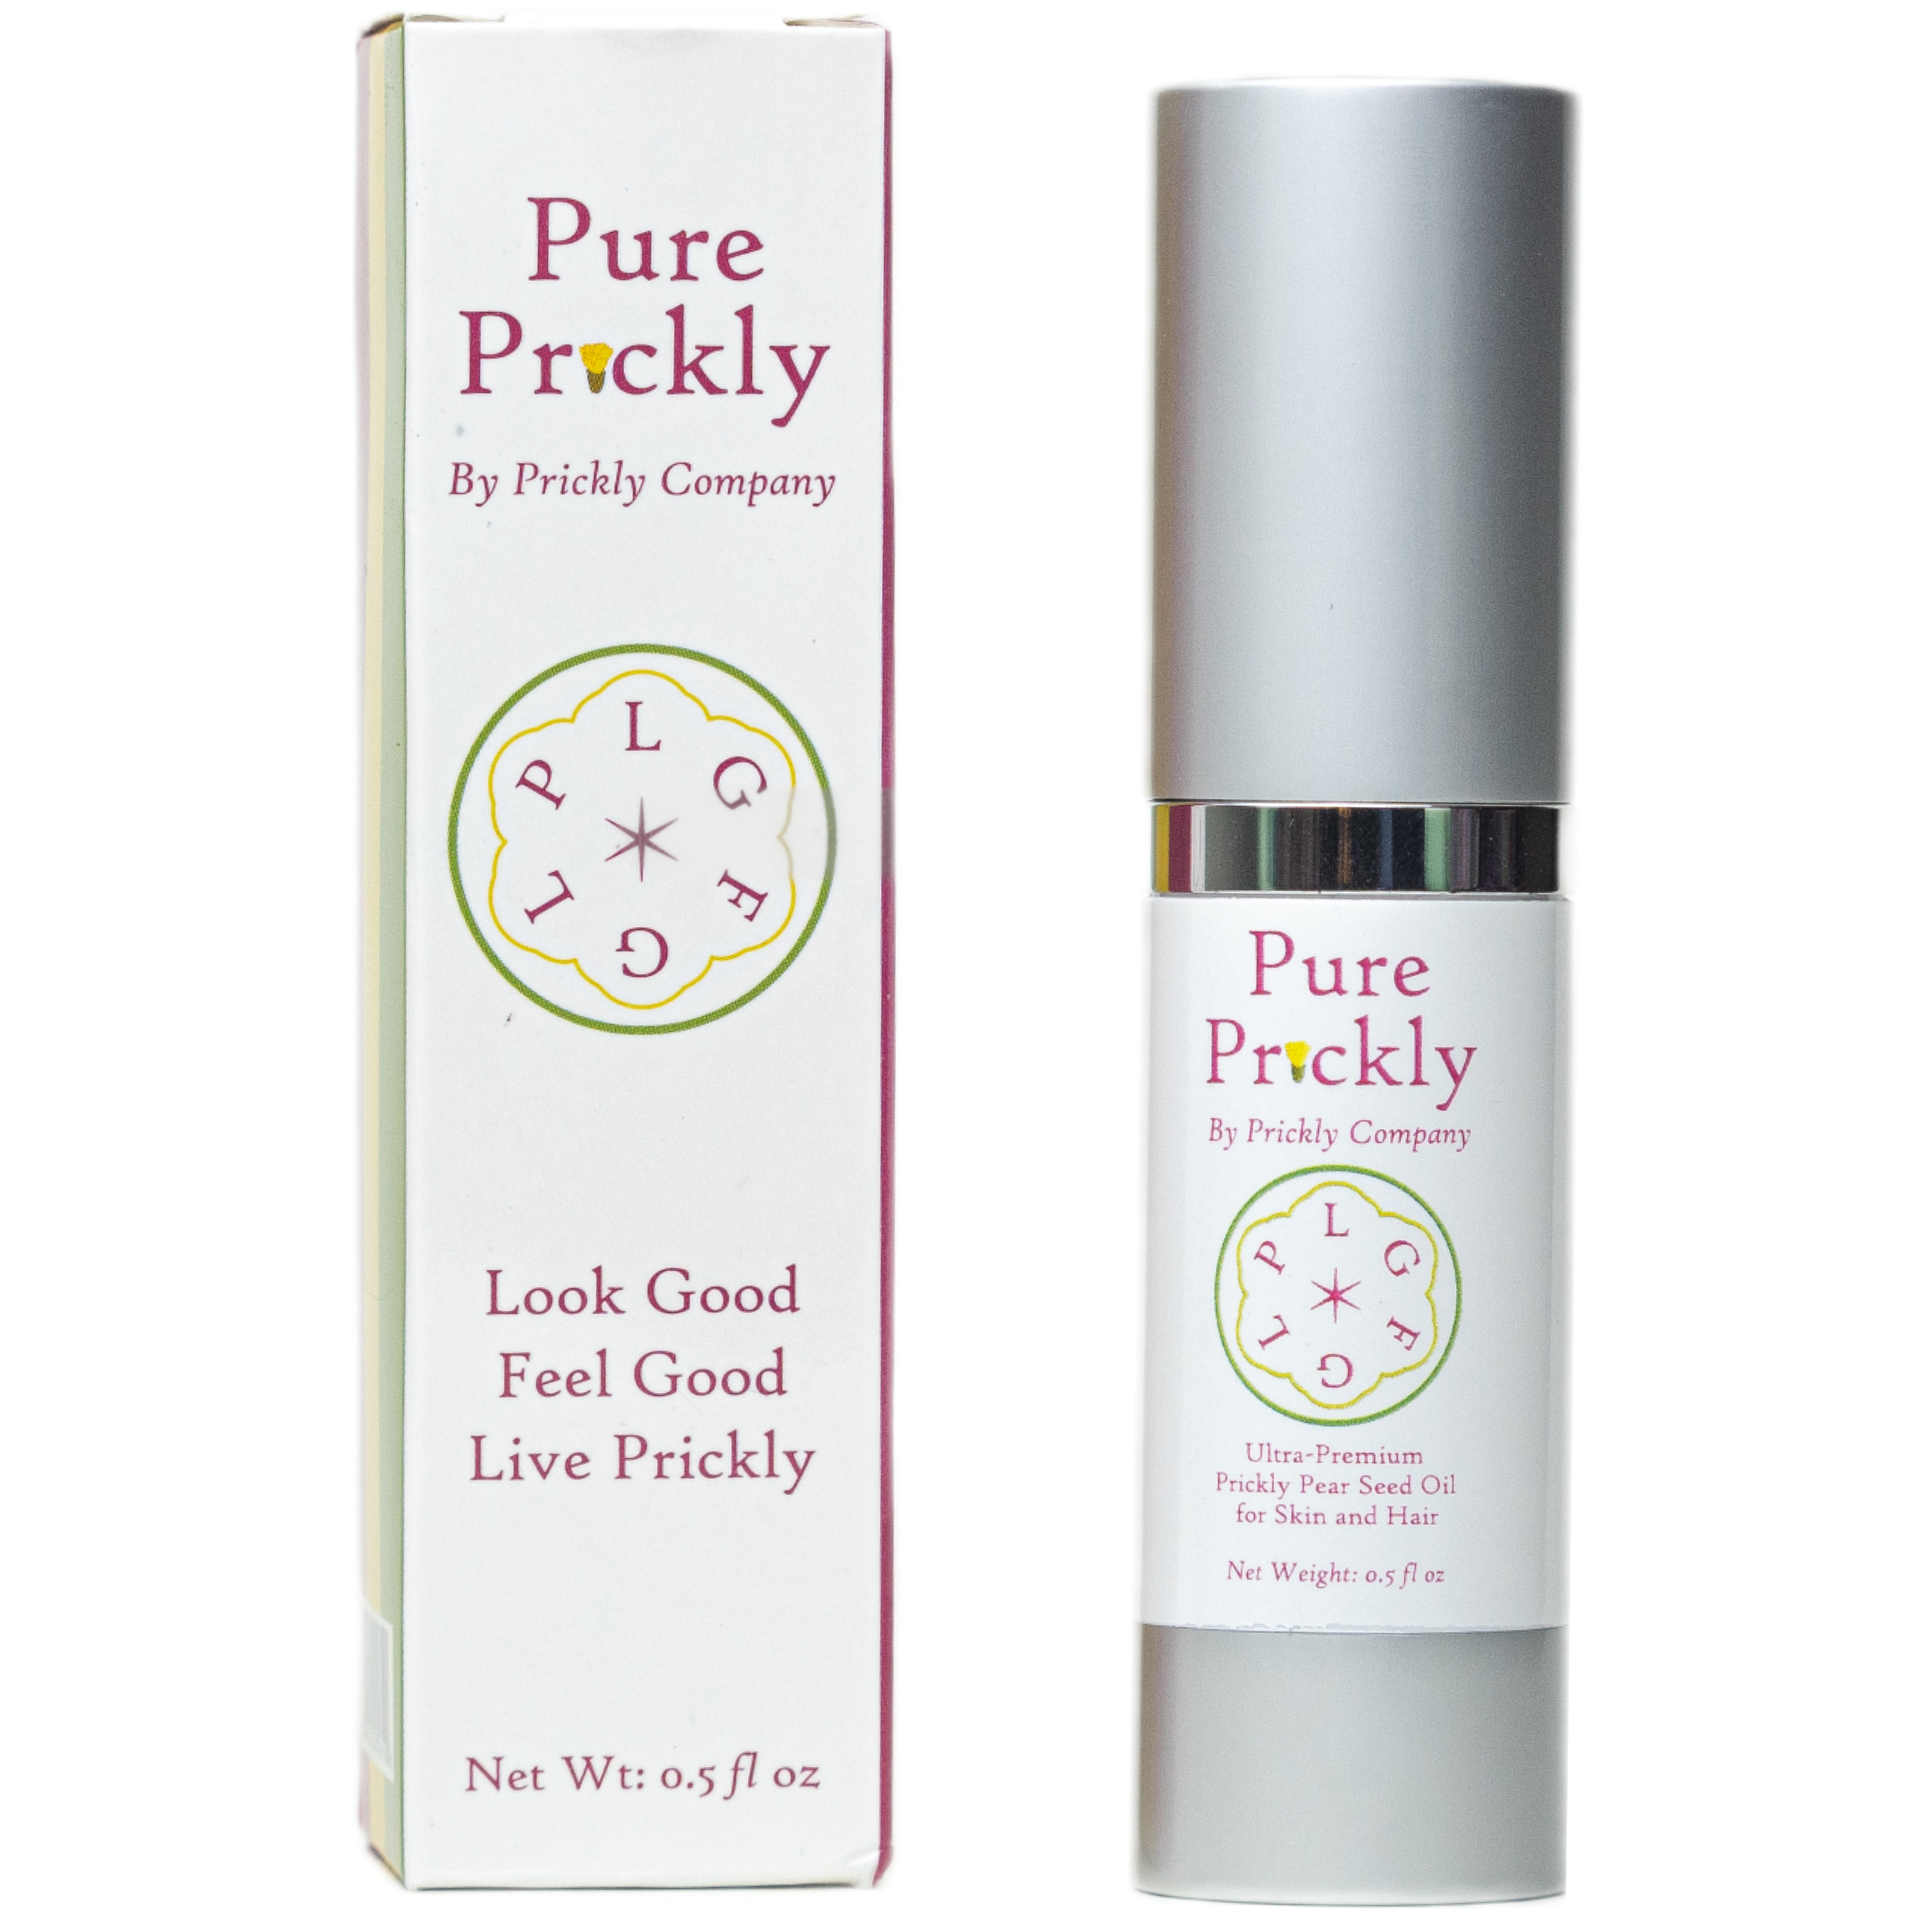 Prickly pears oil - Officine Universelle Buly